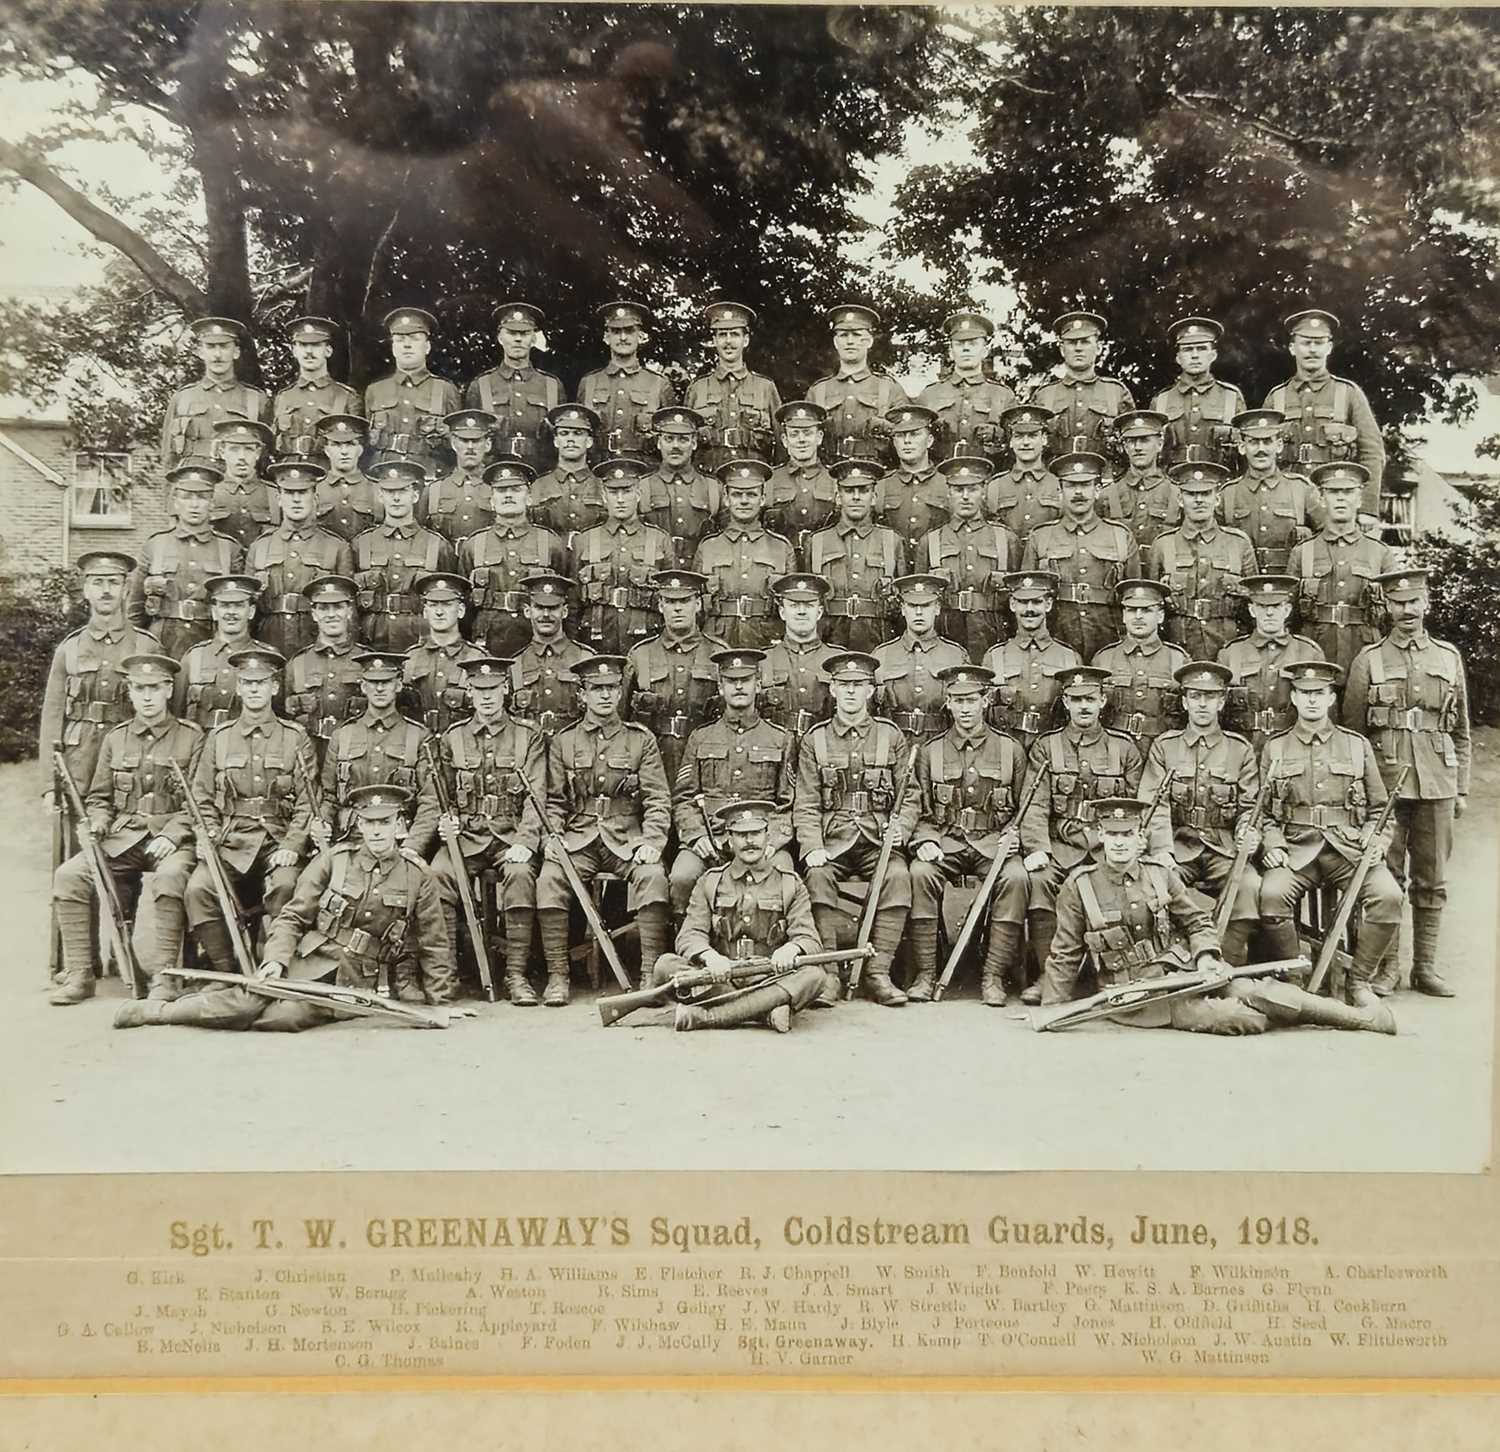 First World War Coldstream Guards group portrait - Image 2 of 2